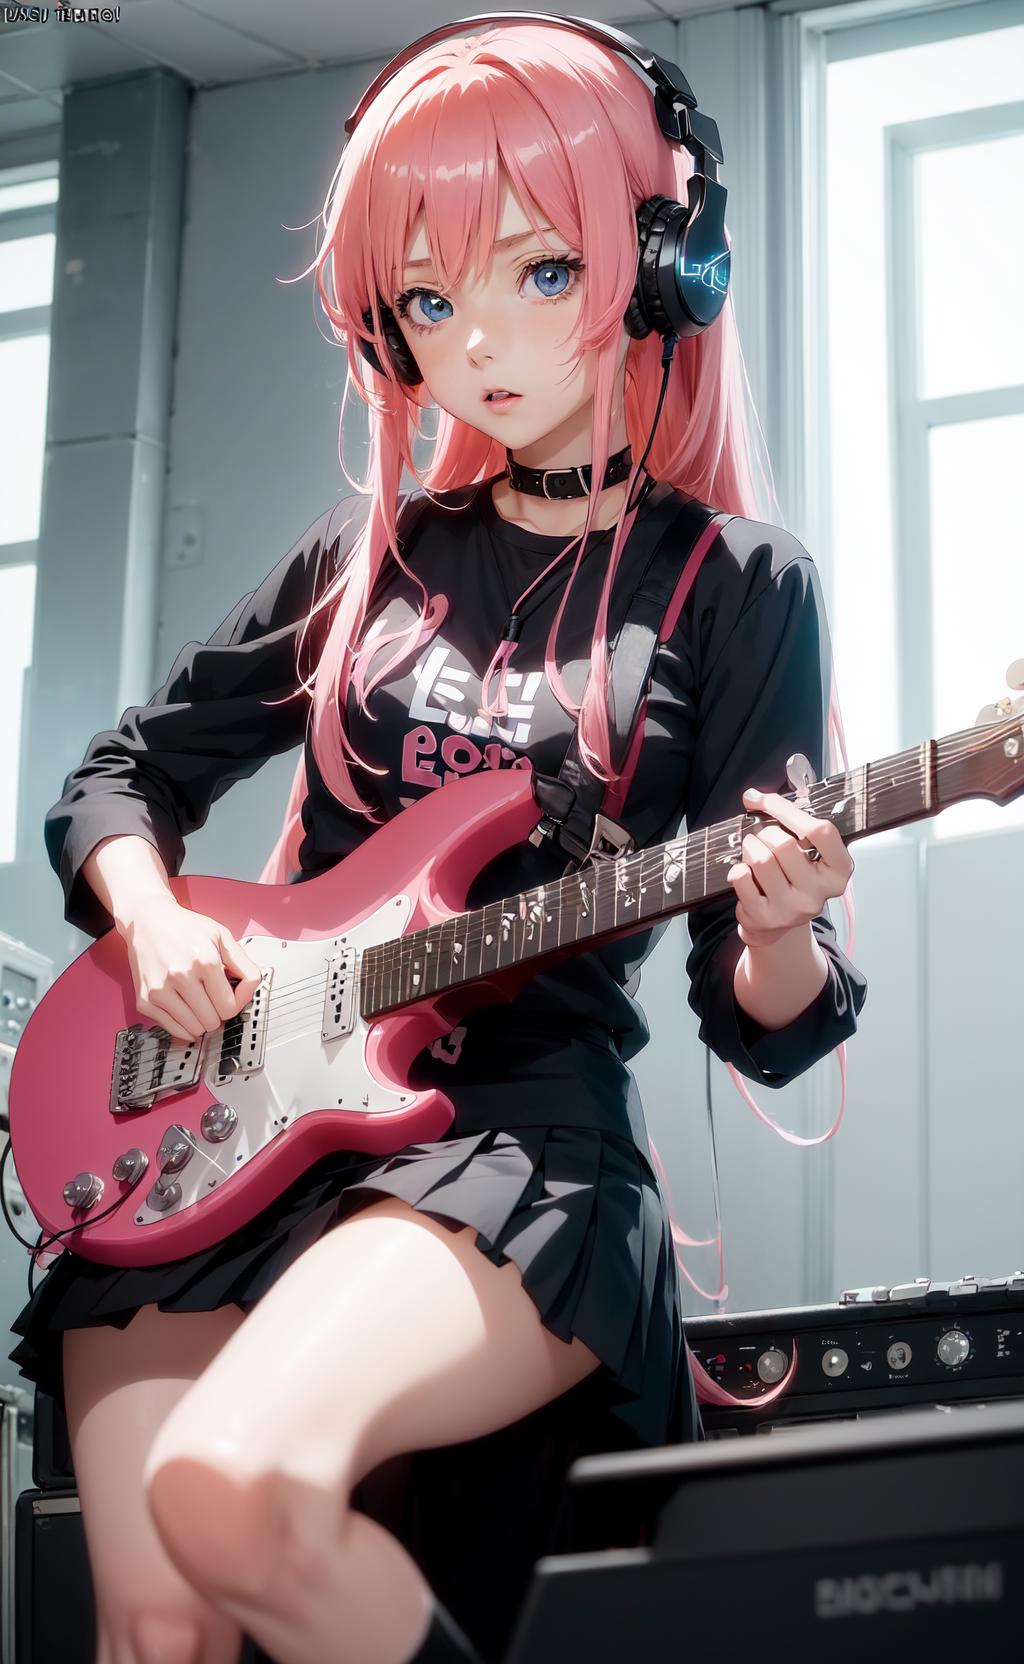 Anime with Guitar And Music For Music Lovers - Just A Girl Who Loves Anime  And Music